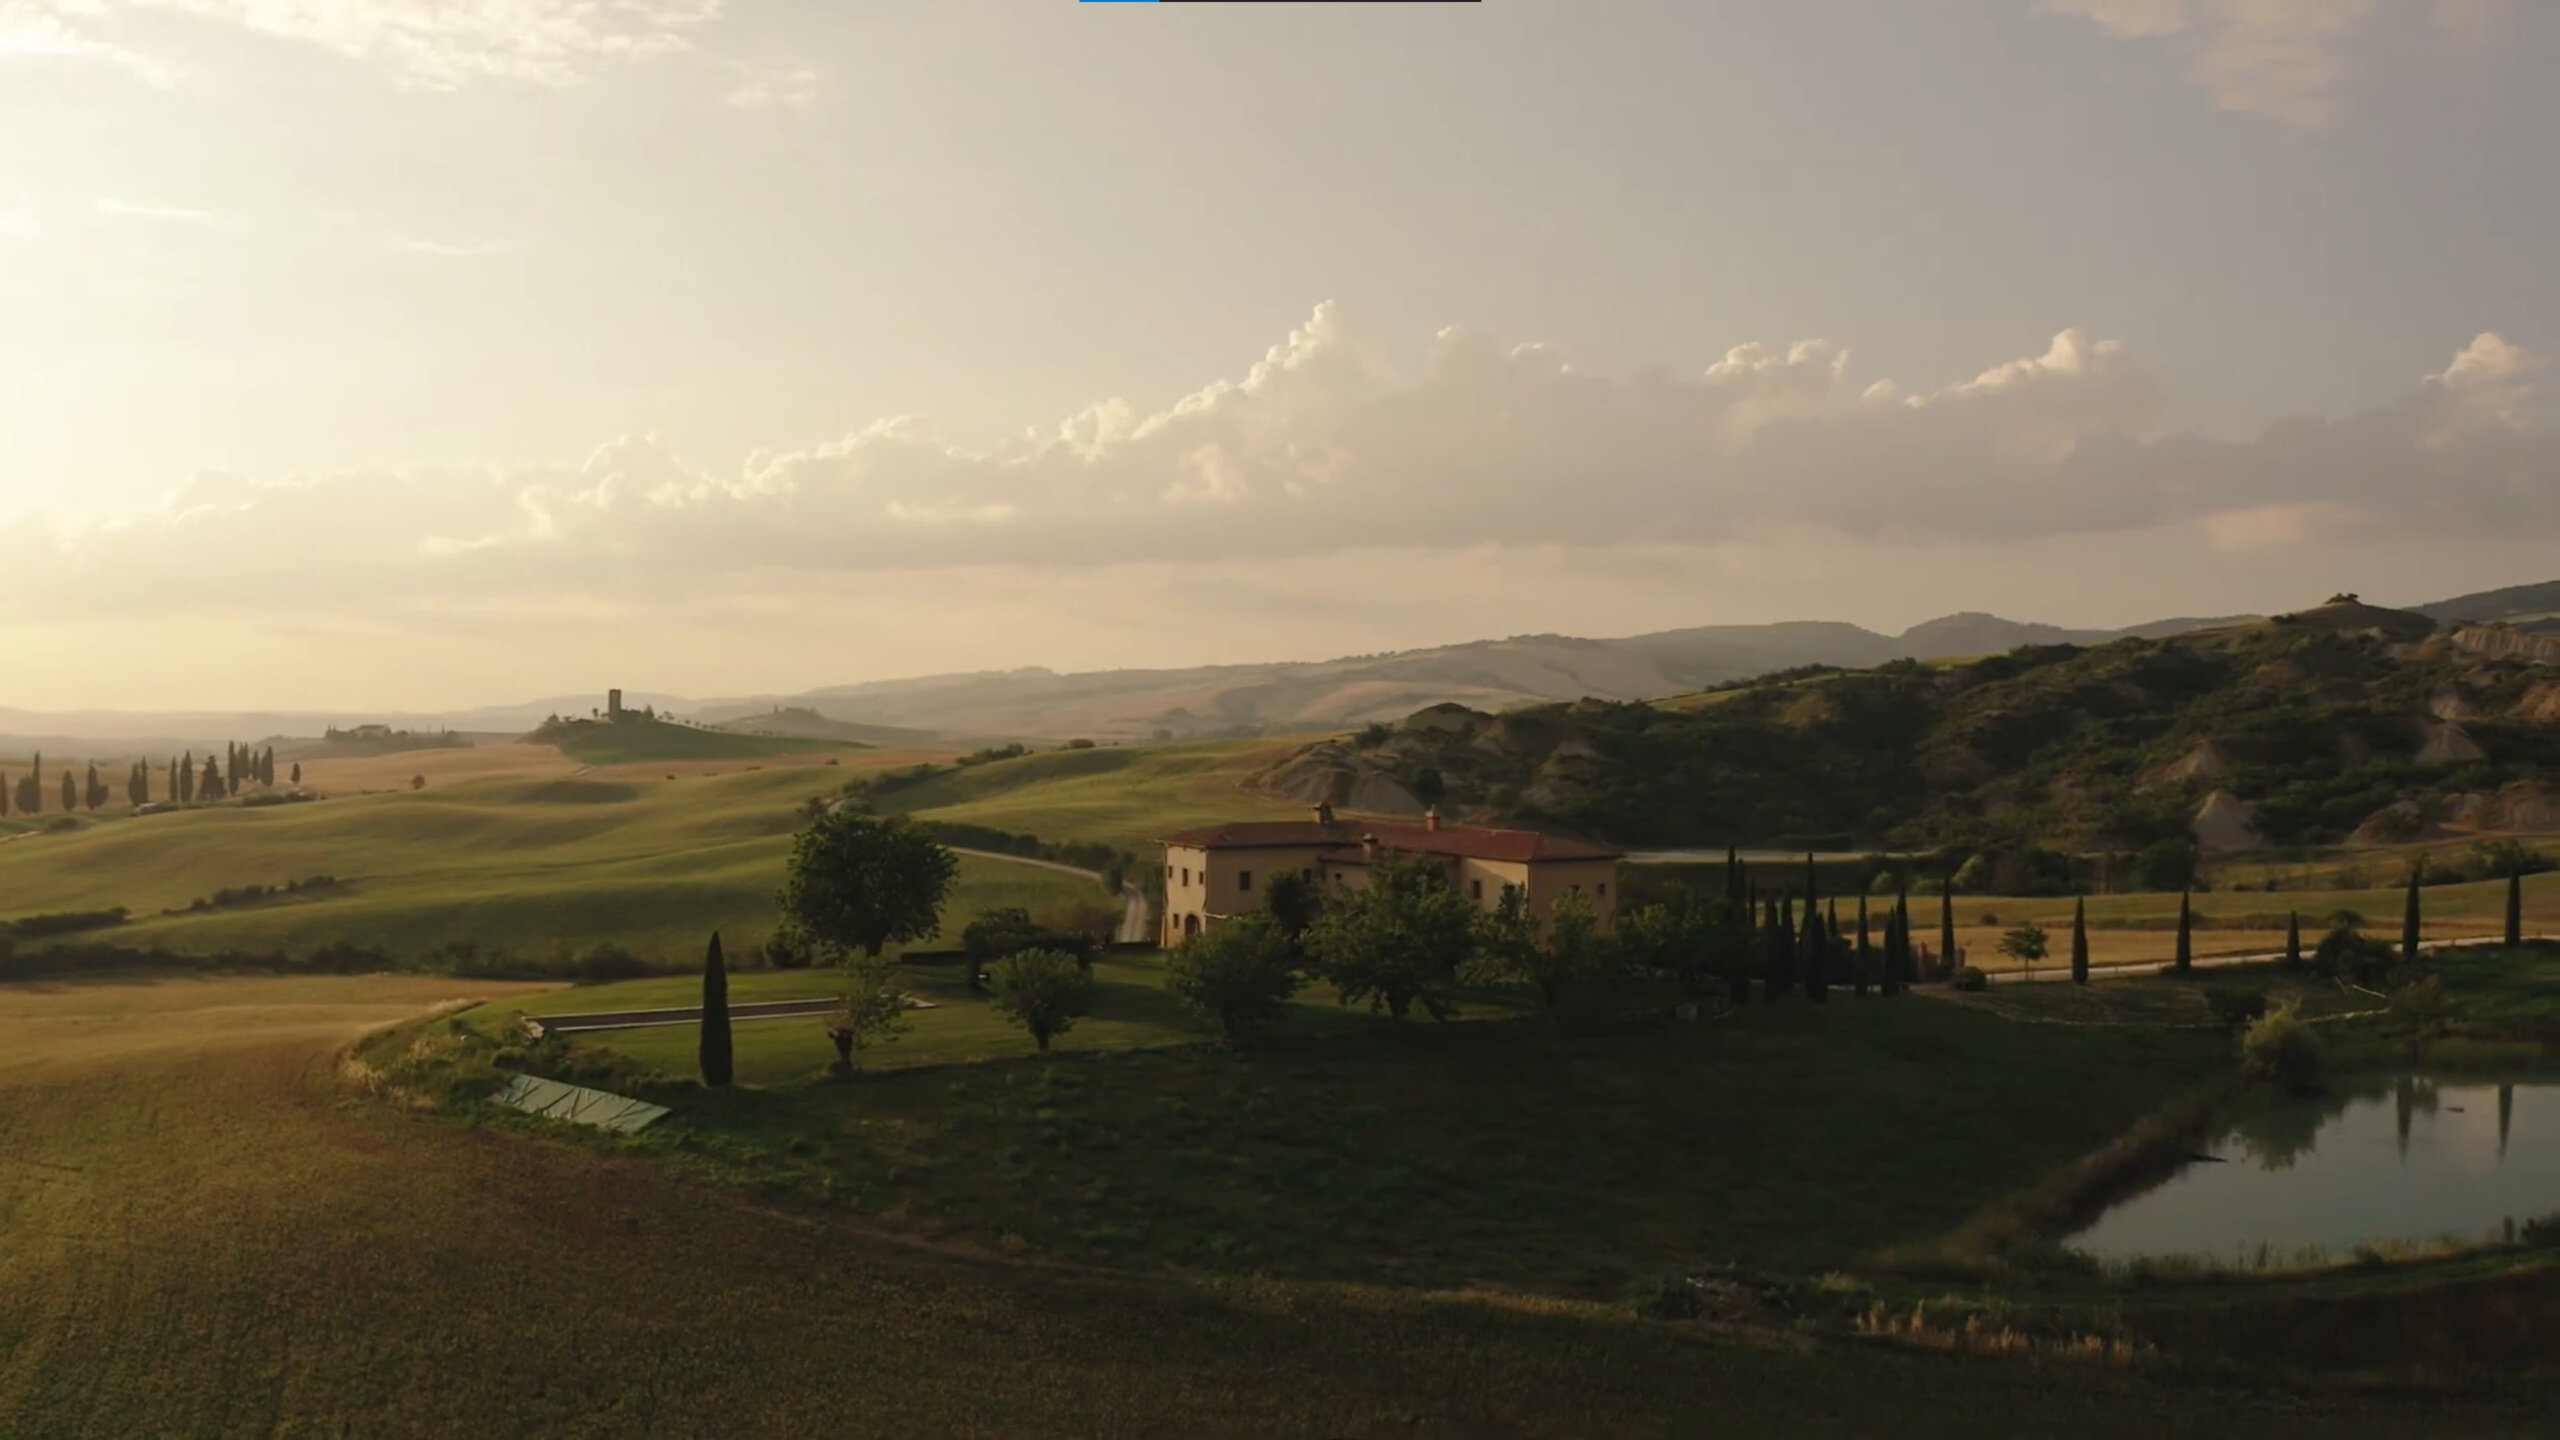 Tuscan villa from above with the hills and landscape stretching out around it.